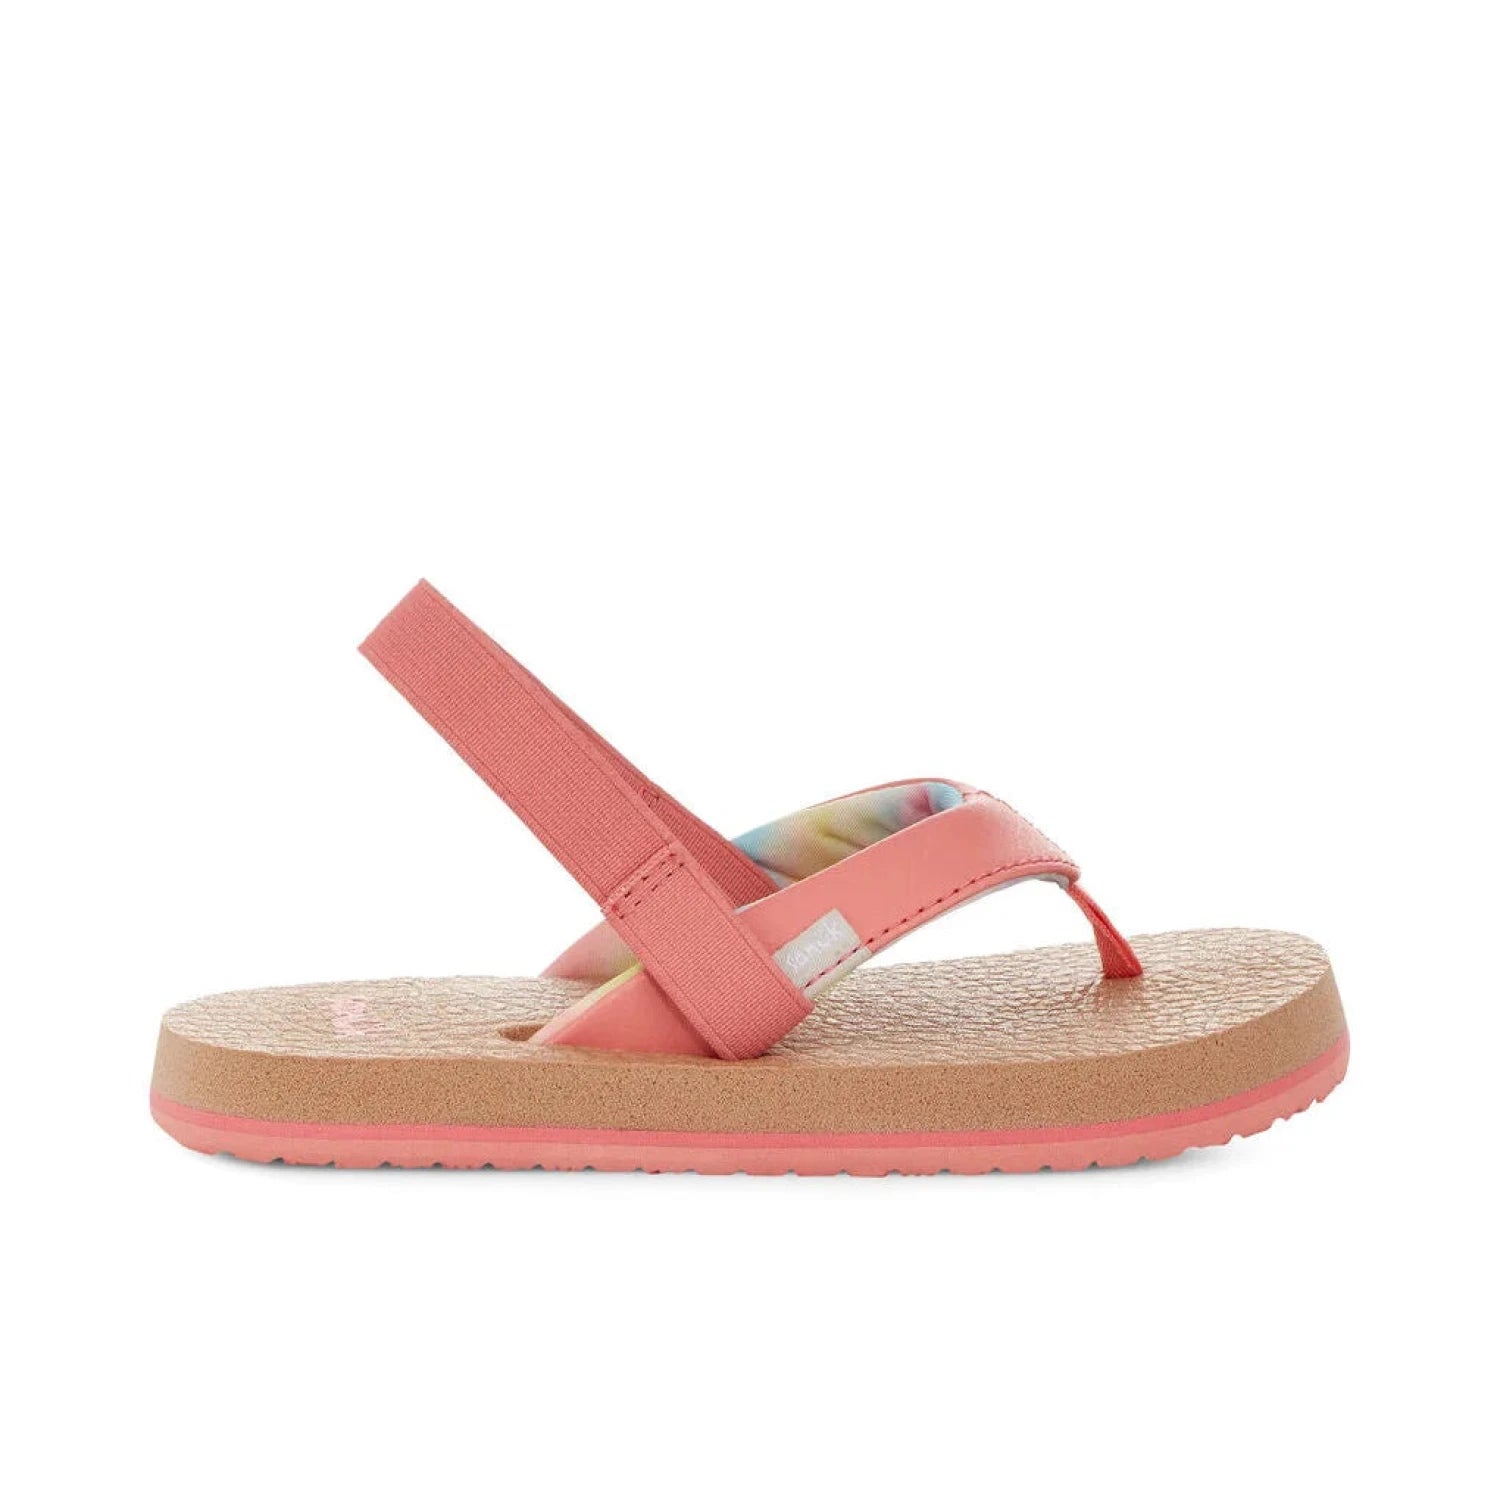 Sanuk Kids Yoga Mat Sandals shown in the Coral color option.  Outside view.